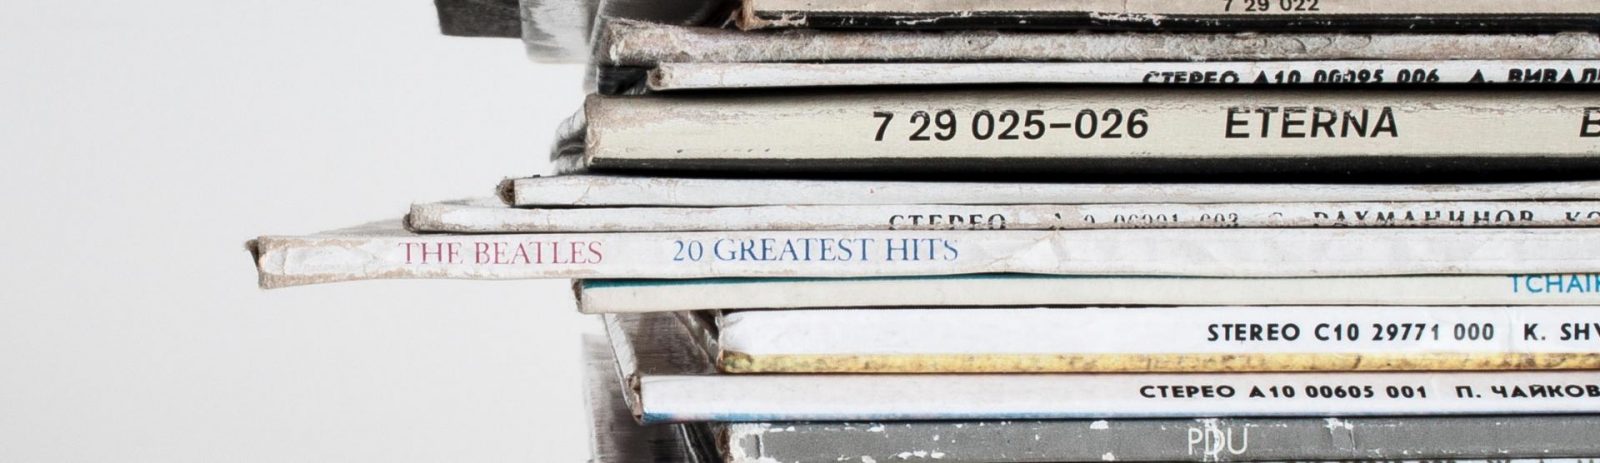 A stack of vinyl records including the Beatles Greatest Hits and Eterna.